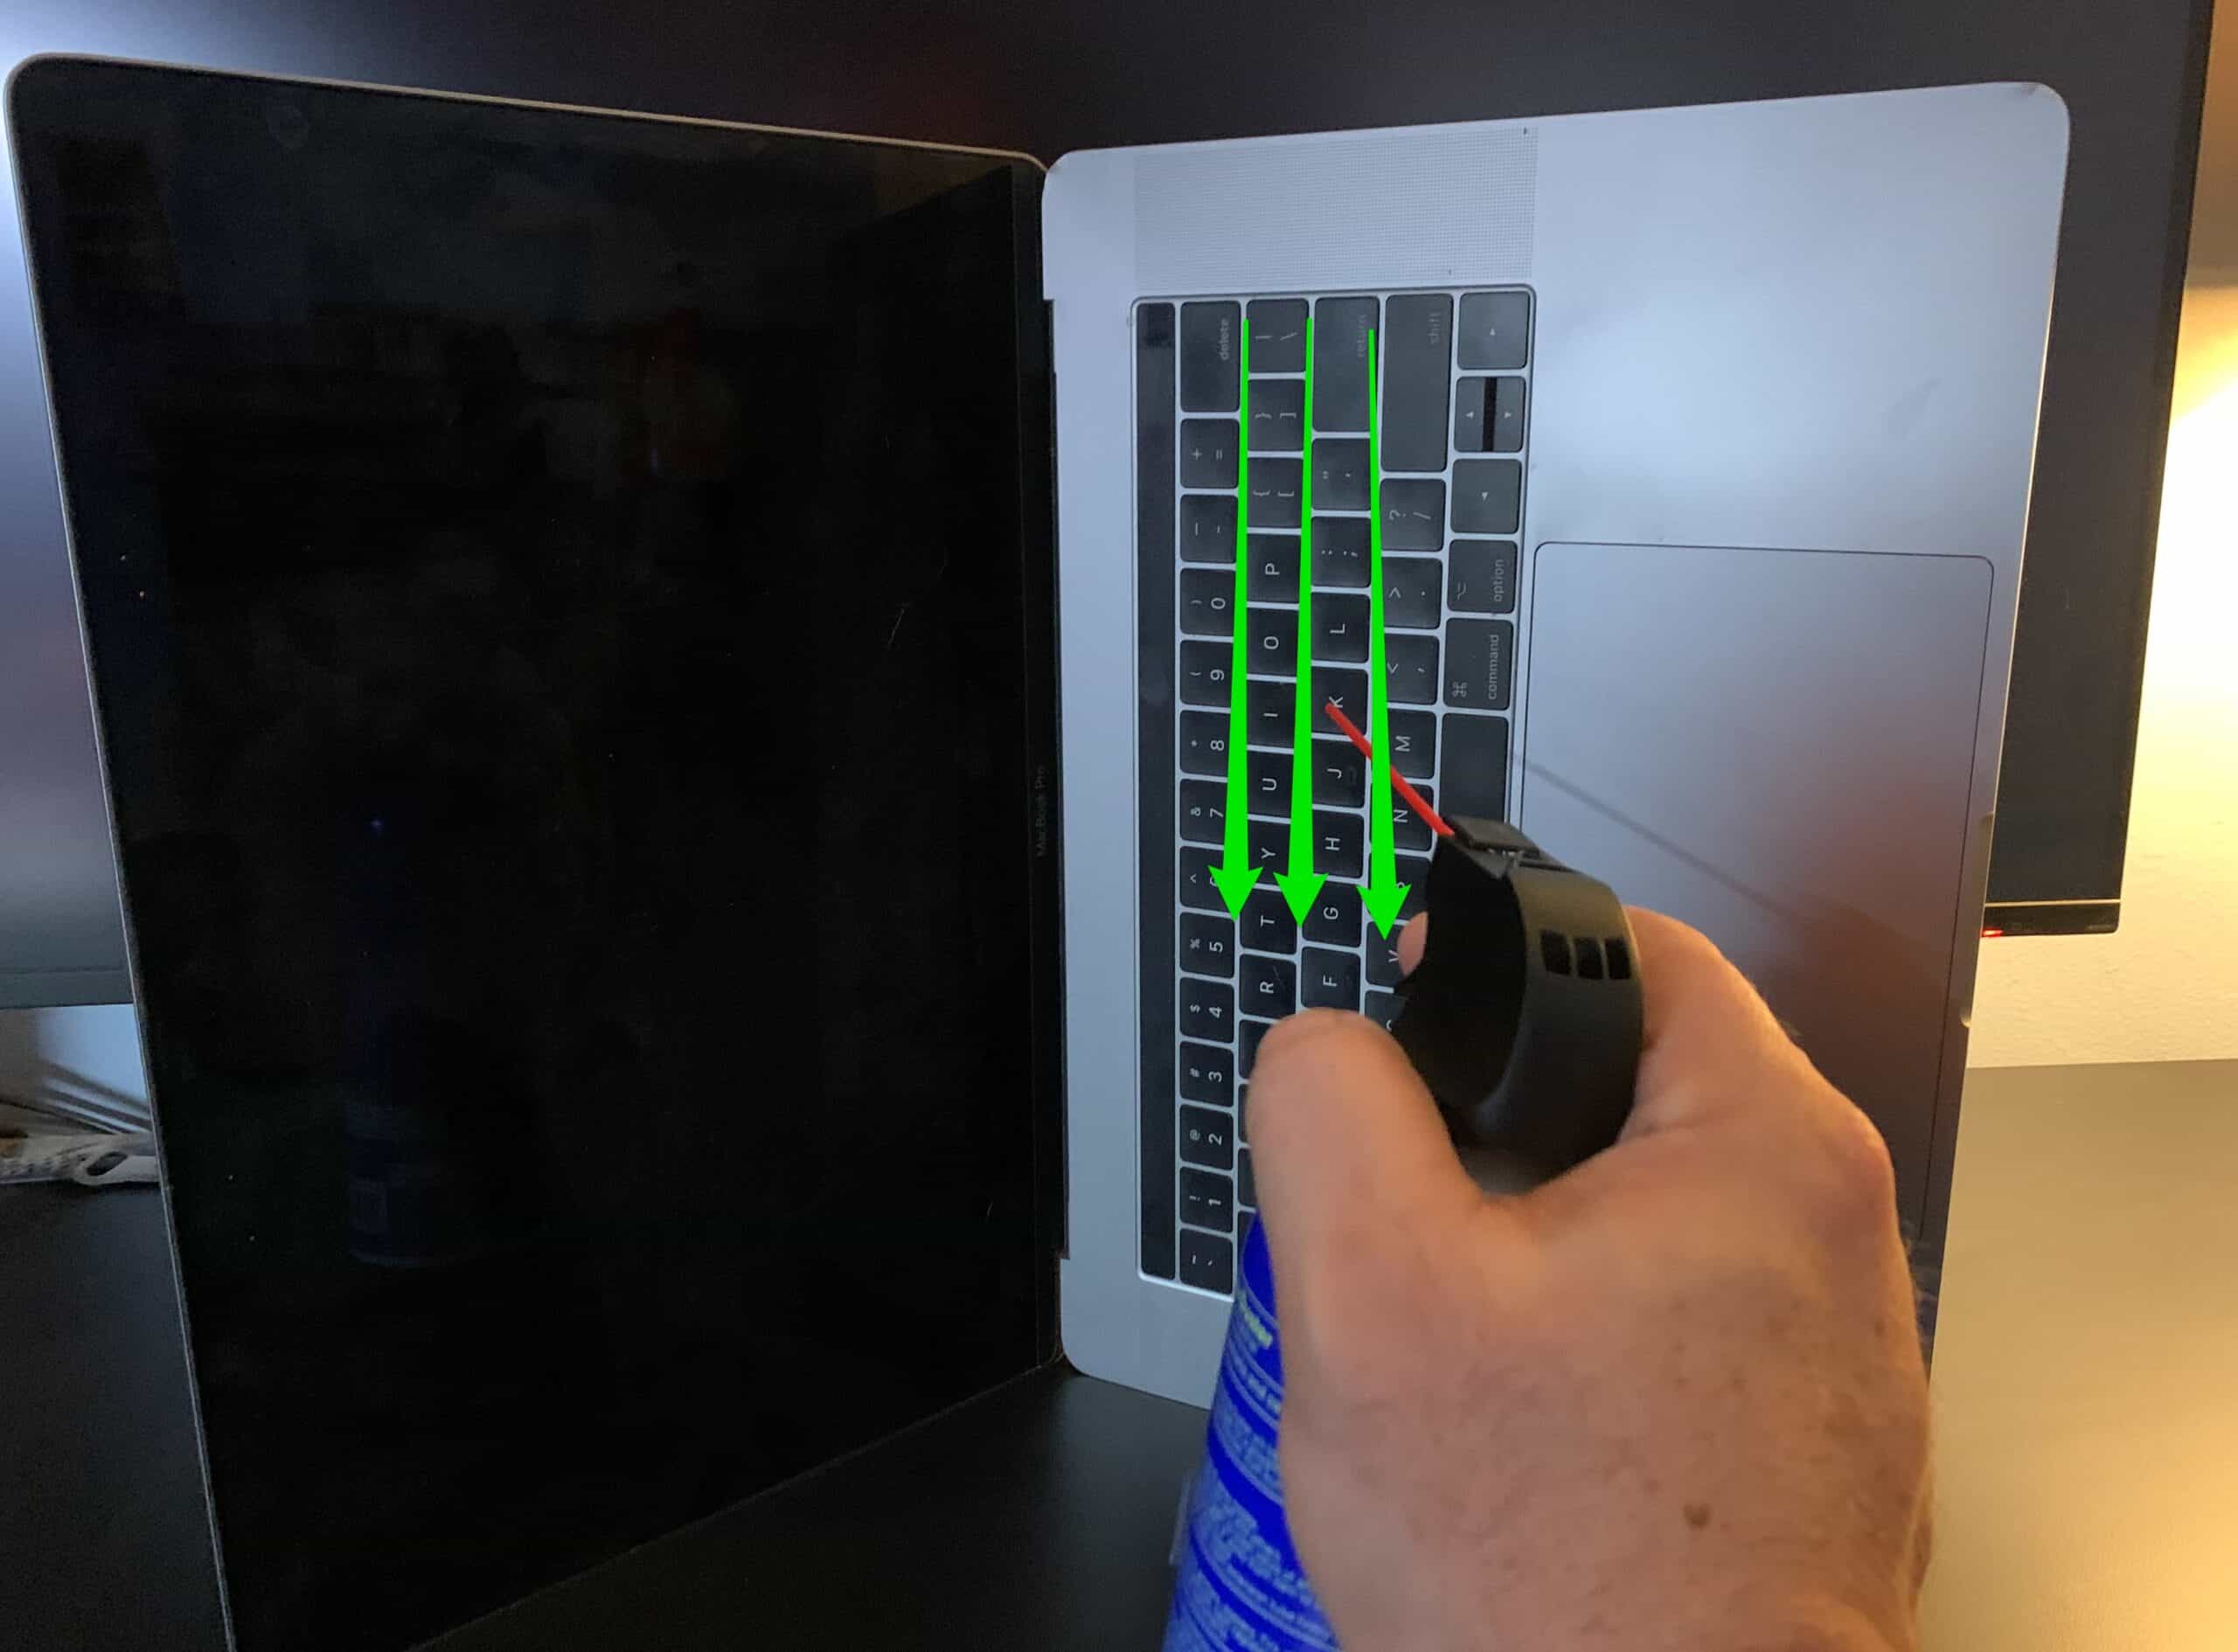 Rotate your Macbook Pro while you’re spraying the keyboard